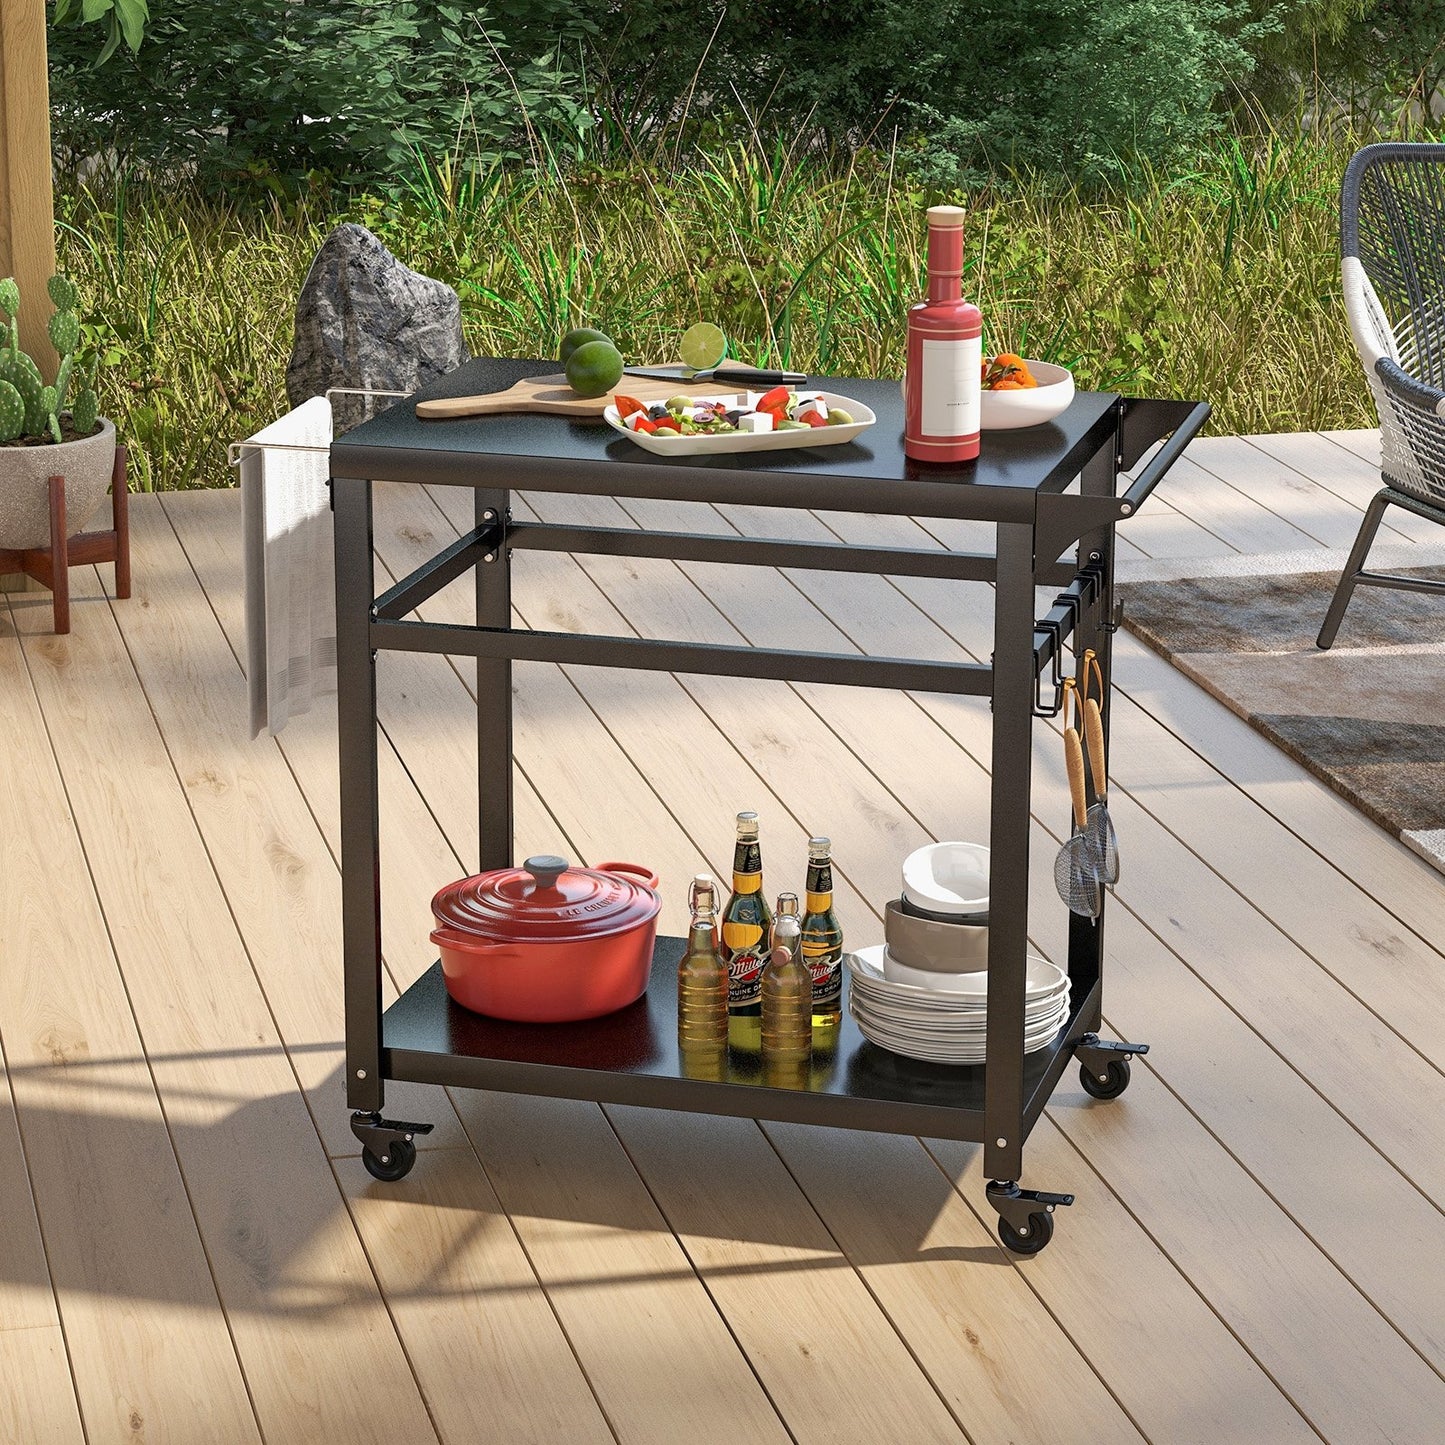 Double-Shelf Movable BBQ Cart with 4 Lockable Wheels, Black